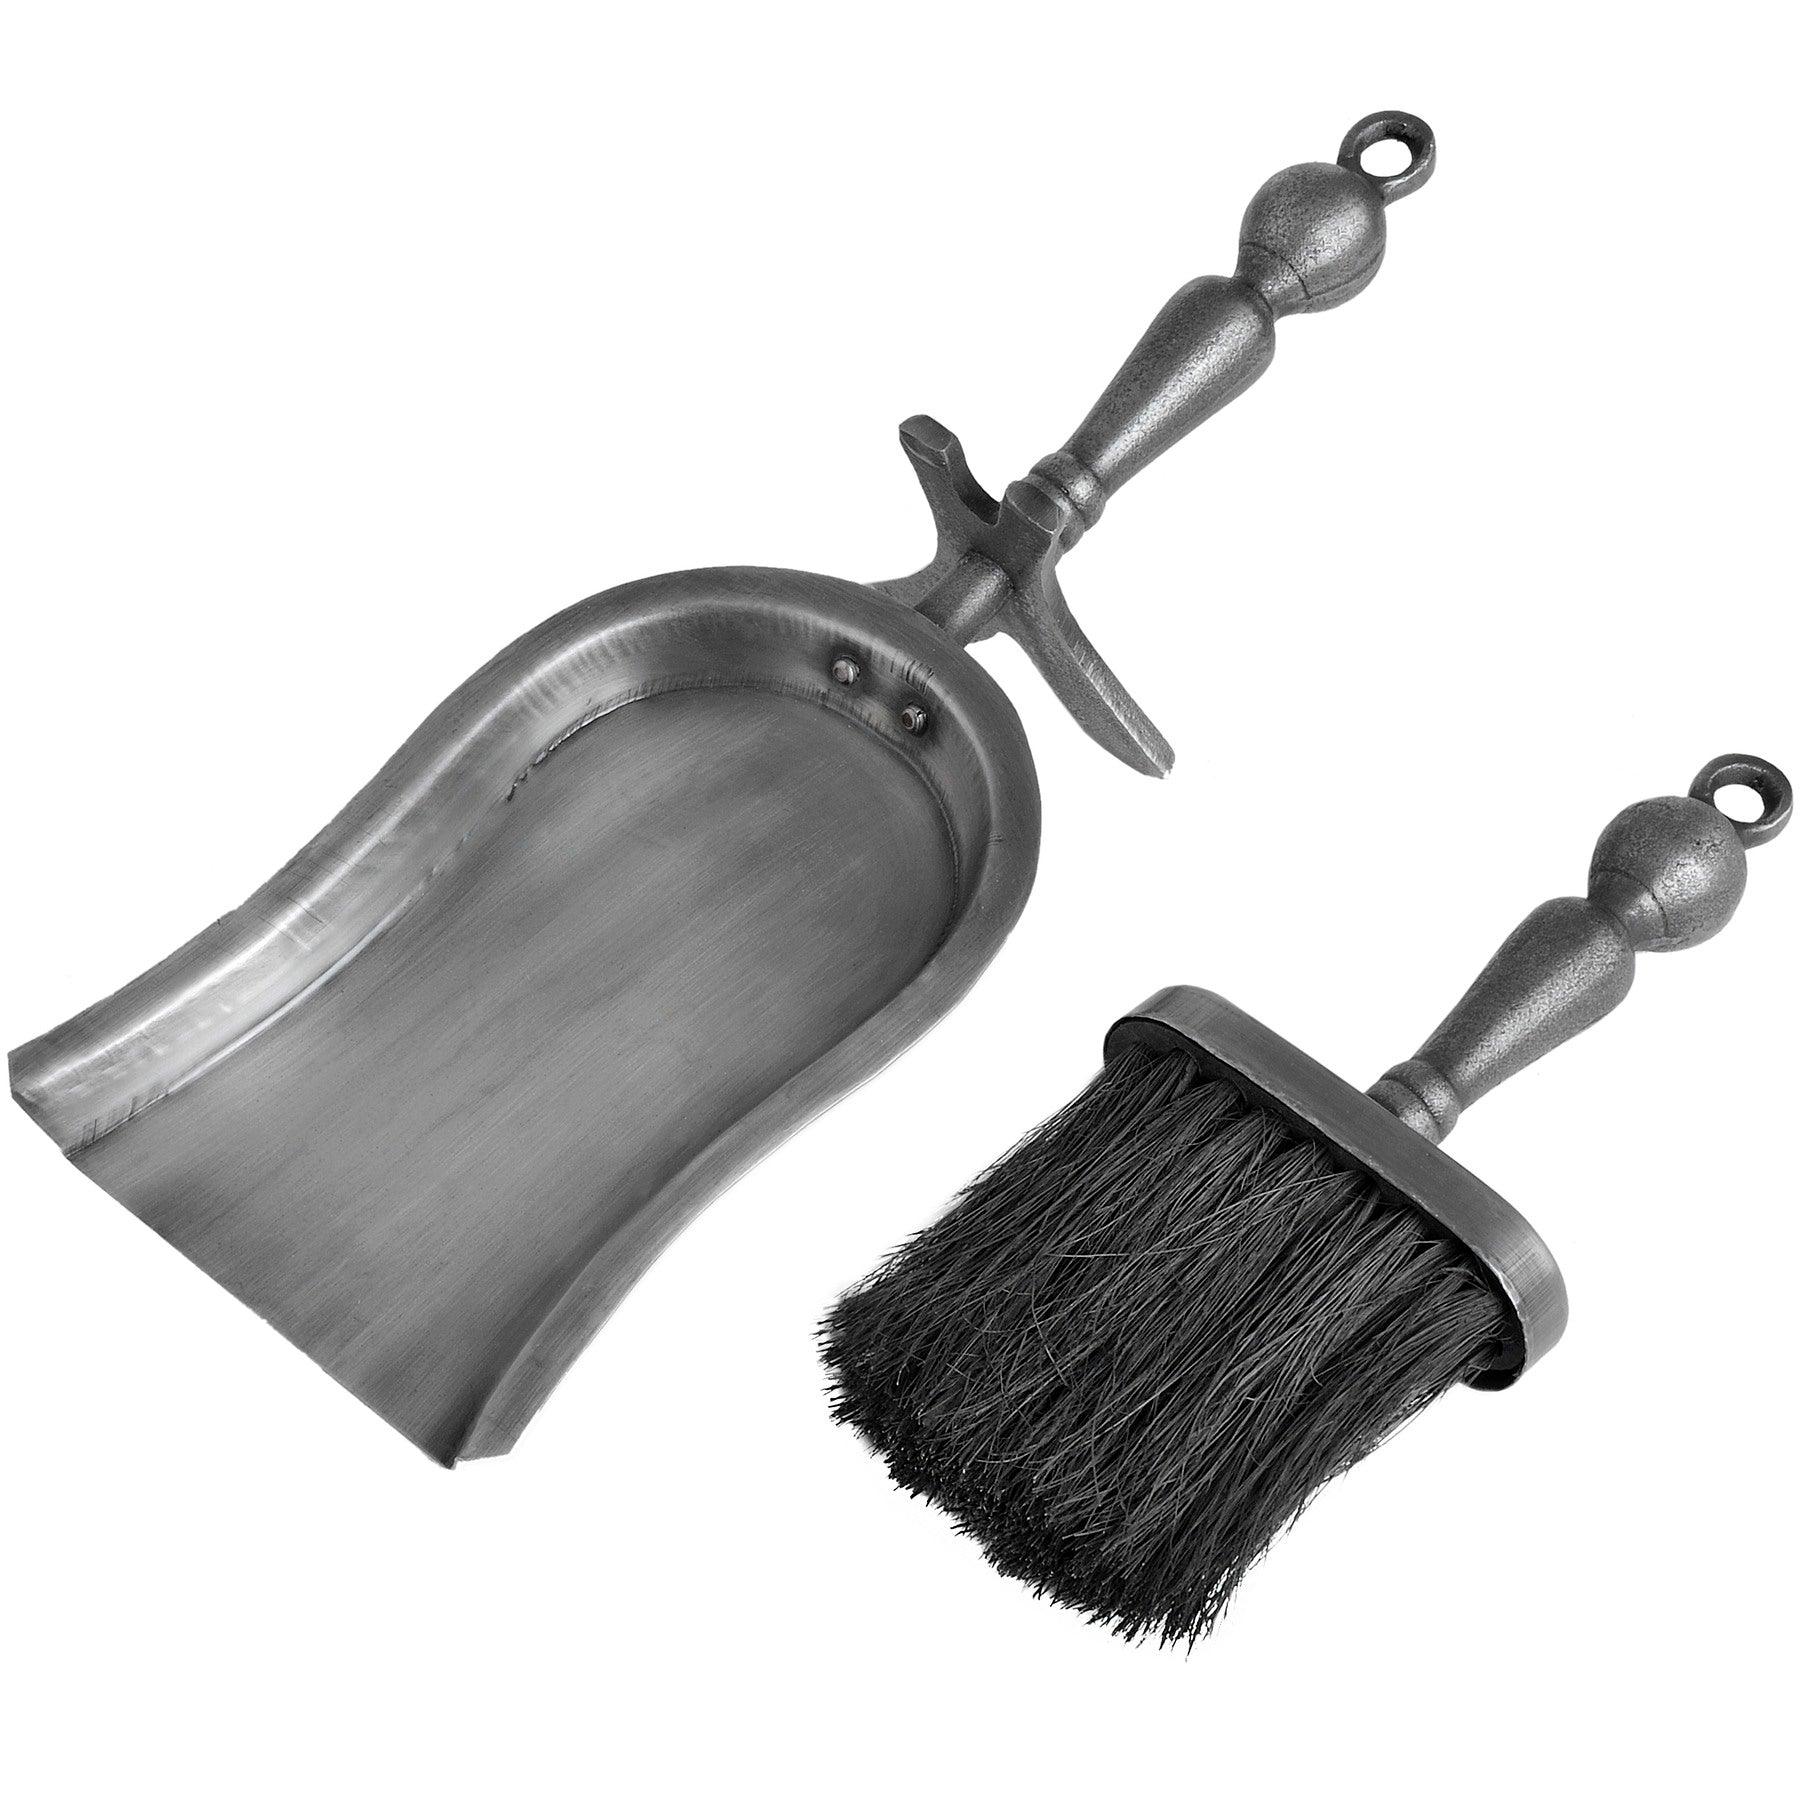 Hearth Tidy Set in Antique Pewter Effect Finish - Vookoo Lifestyle